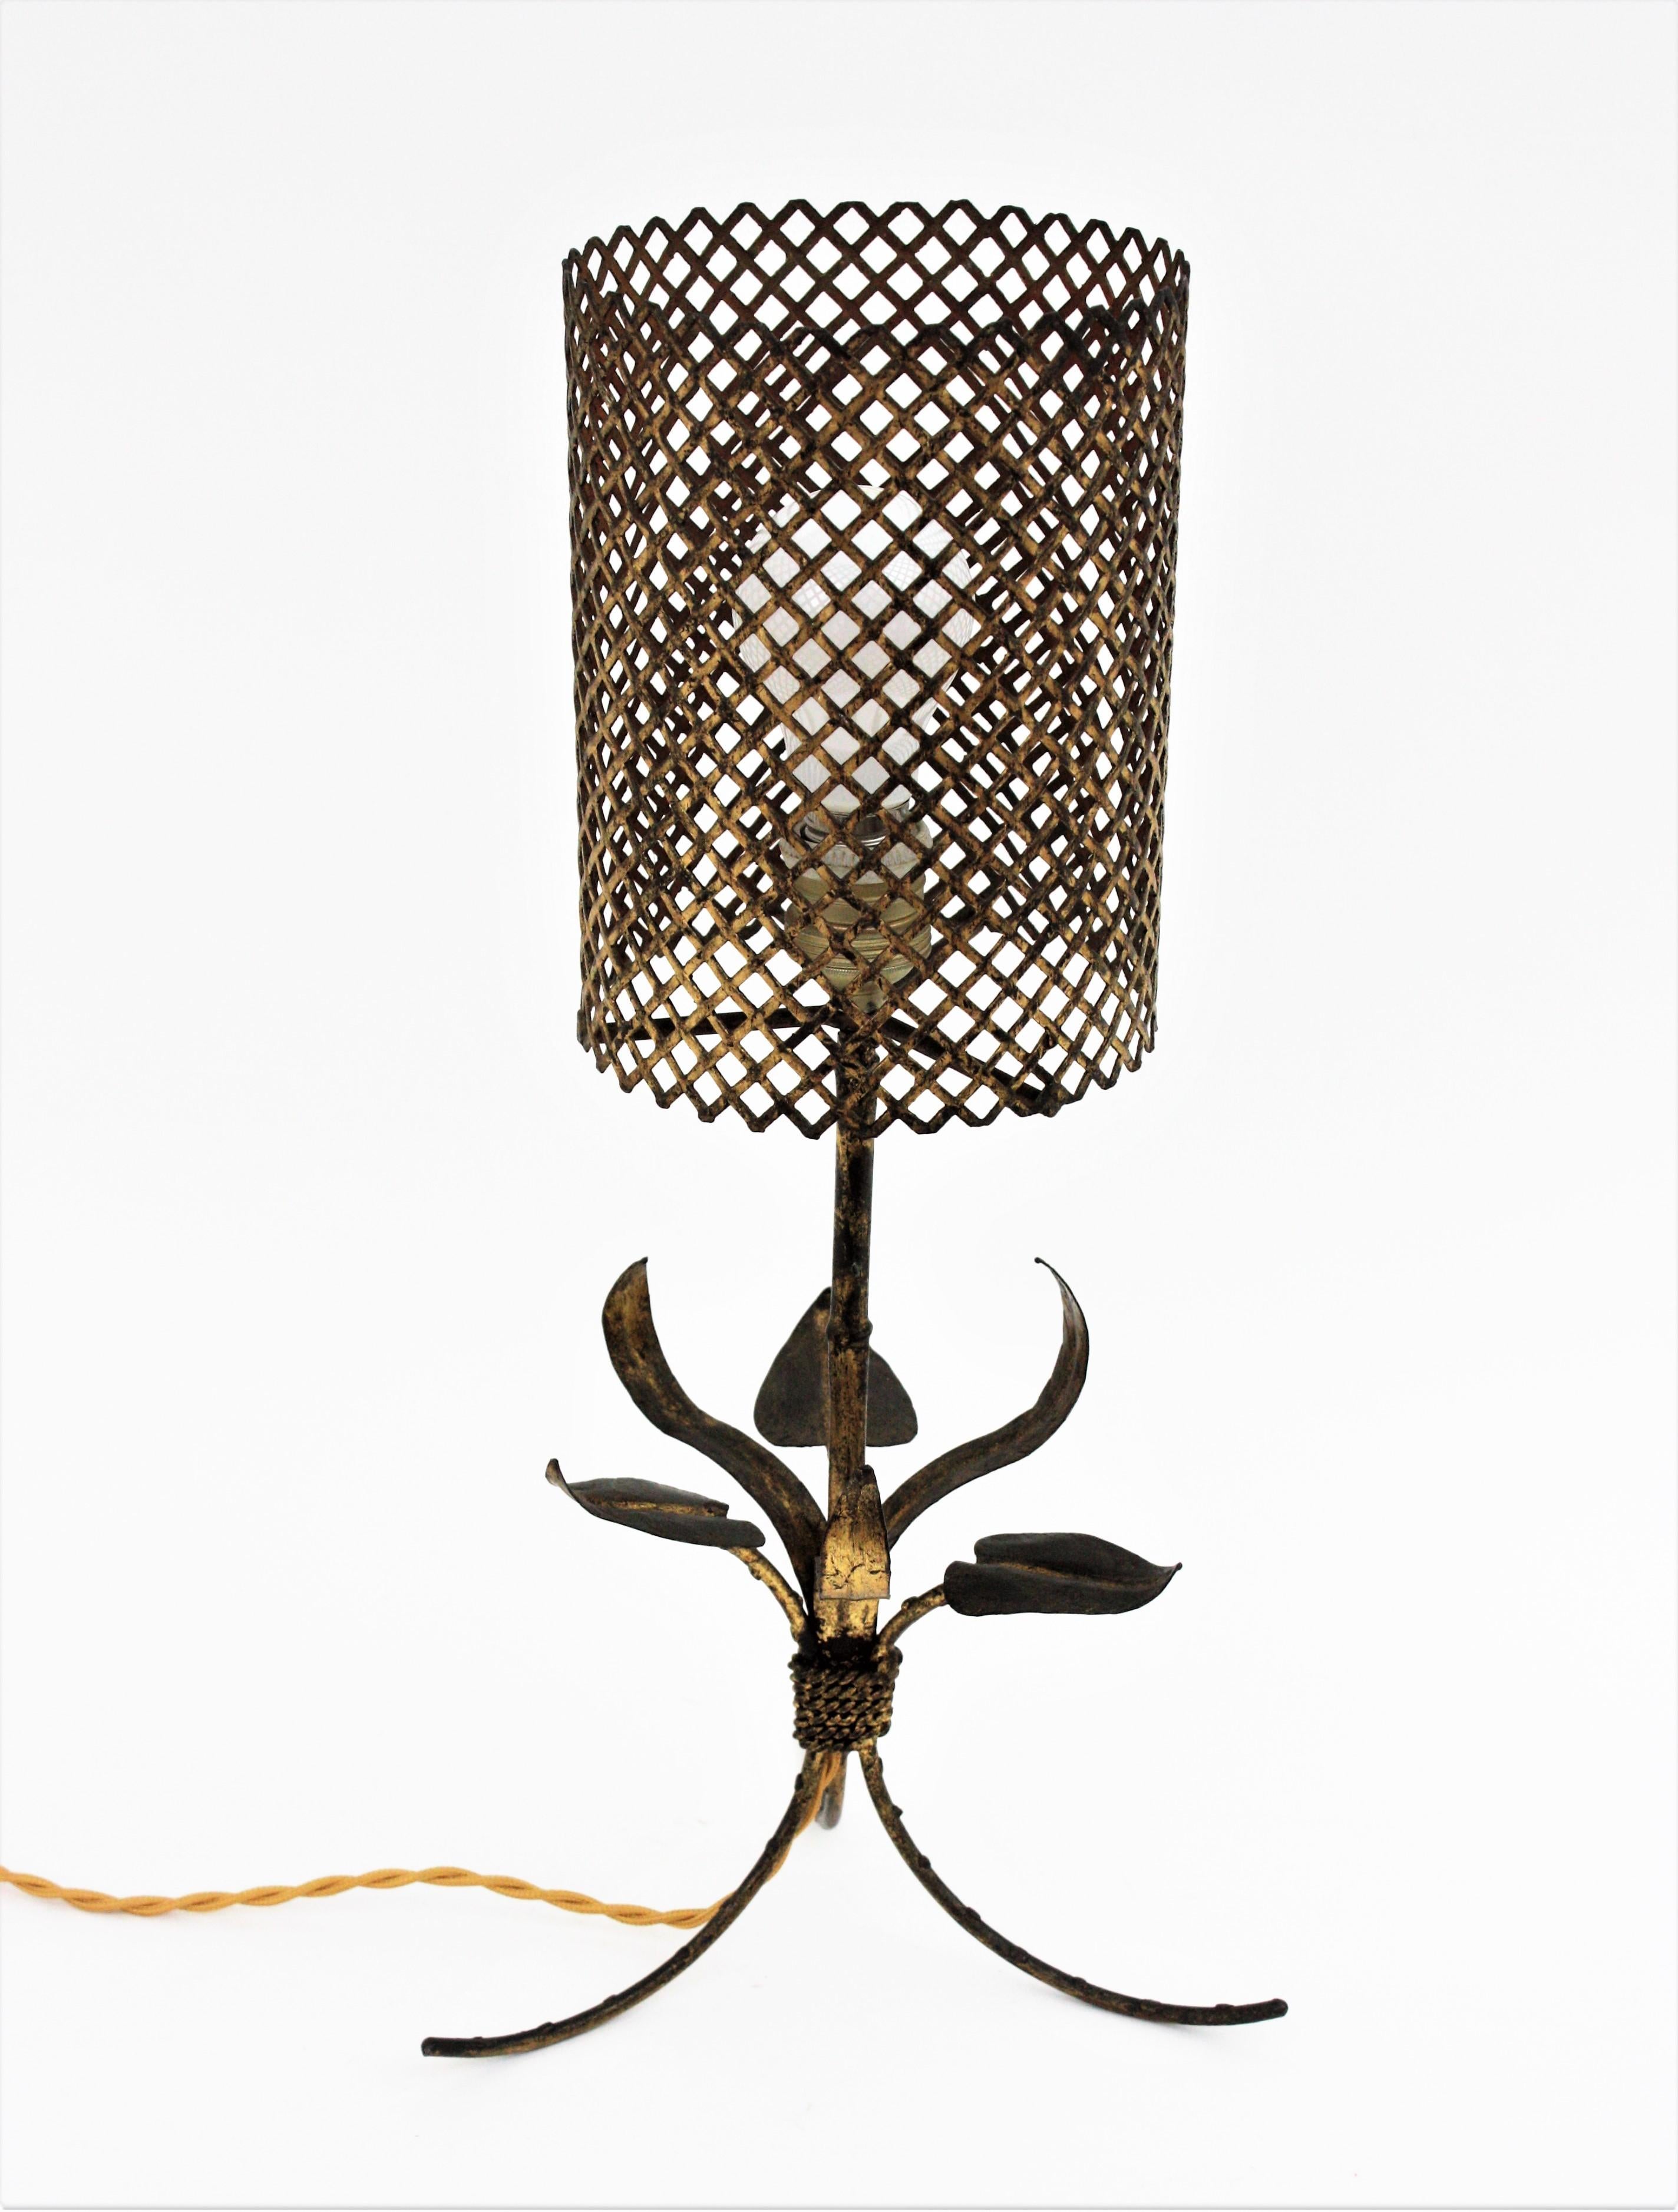 French Faux Bamboo Foliage Tripod Table Lamp in Gilt Metal, 1940s For Sale 8